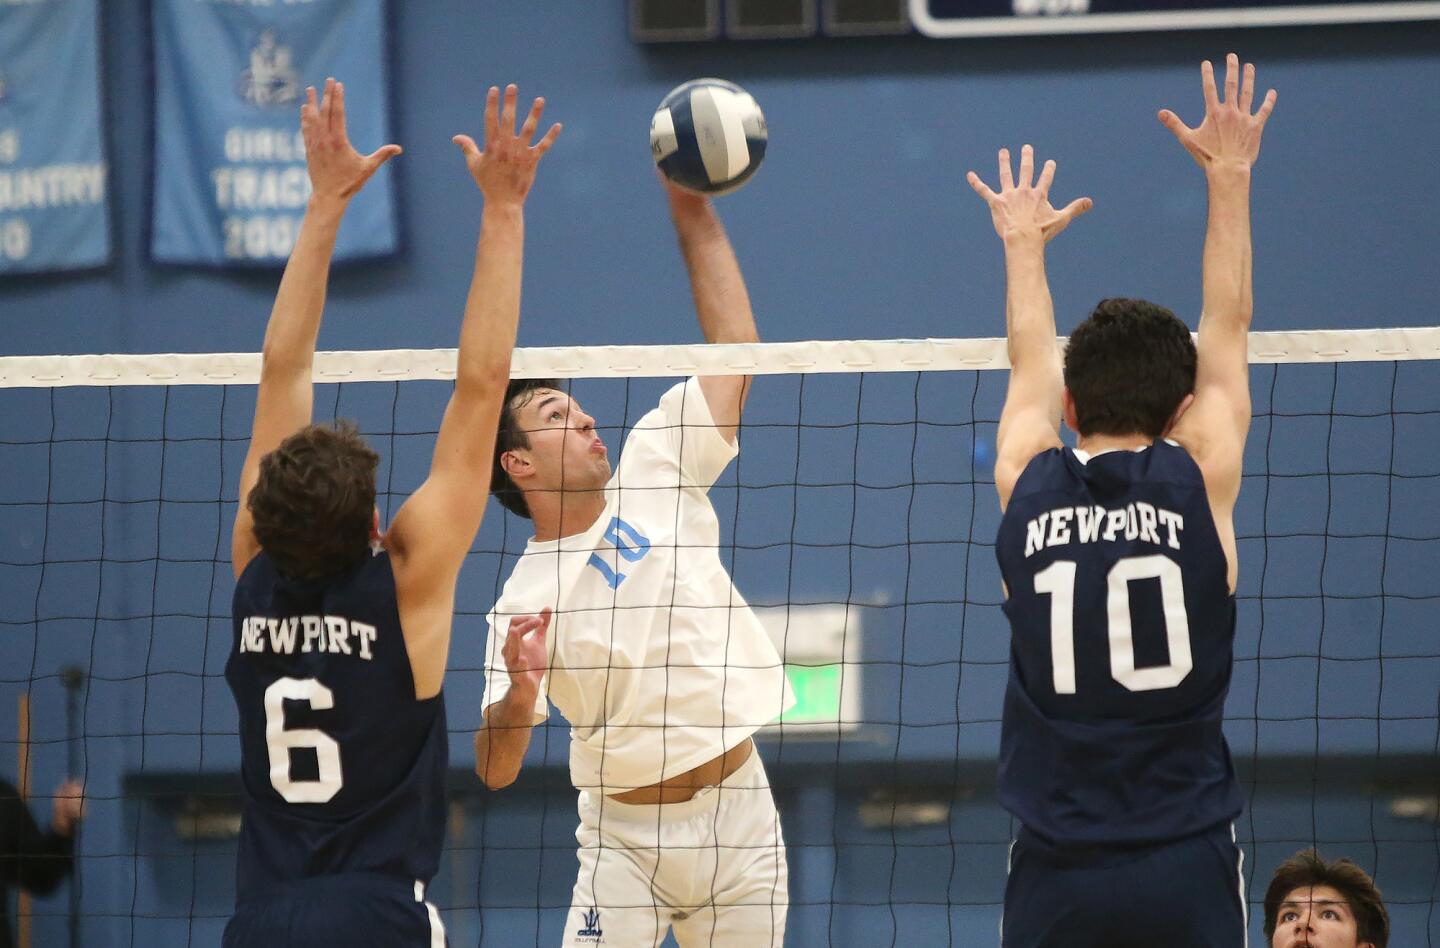 Corona del Mar's Nick Alacano (10) kills a ball between Newport Harbor blockers Blake Ludes and Caden Garrido (10) during second round of the Battle of the Bay boys' volleyball match in Surf League play on Wednesday.